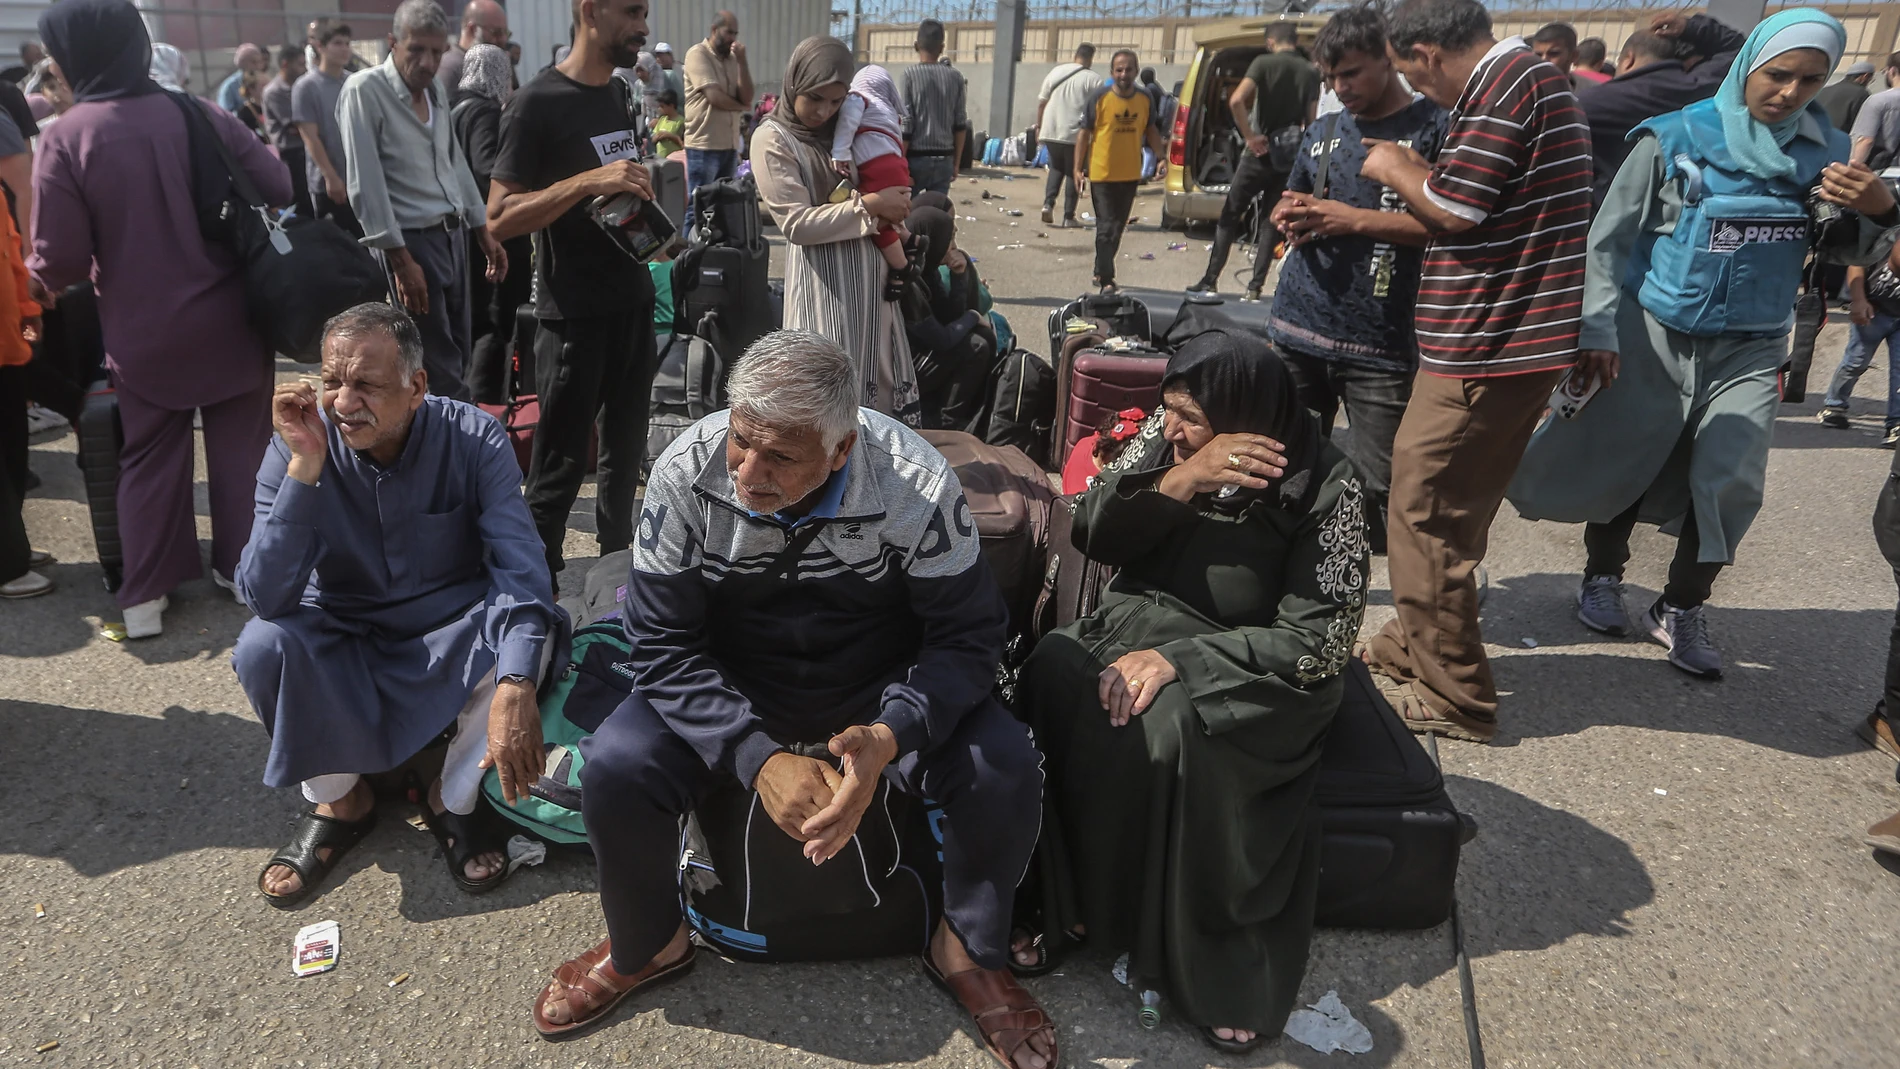 16 October 2023, Palestinian Territories, Rafah: Palestinians, some with foreign passports, wait for aid and potential crossing into Egypt, at the Rafah border crossing in the southern Gaza Strip. According to Gaza Health Ministry, the death toll from Israeli raids on the Gaza Strip has risen to about 2,750 and 9,700 people were injured since the worst escalation of violence in years between the Israelis and Palestinians began last week, while according to the UN, some 1 million people have f...